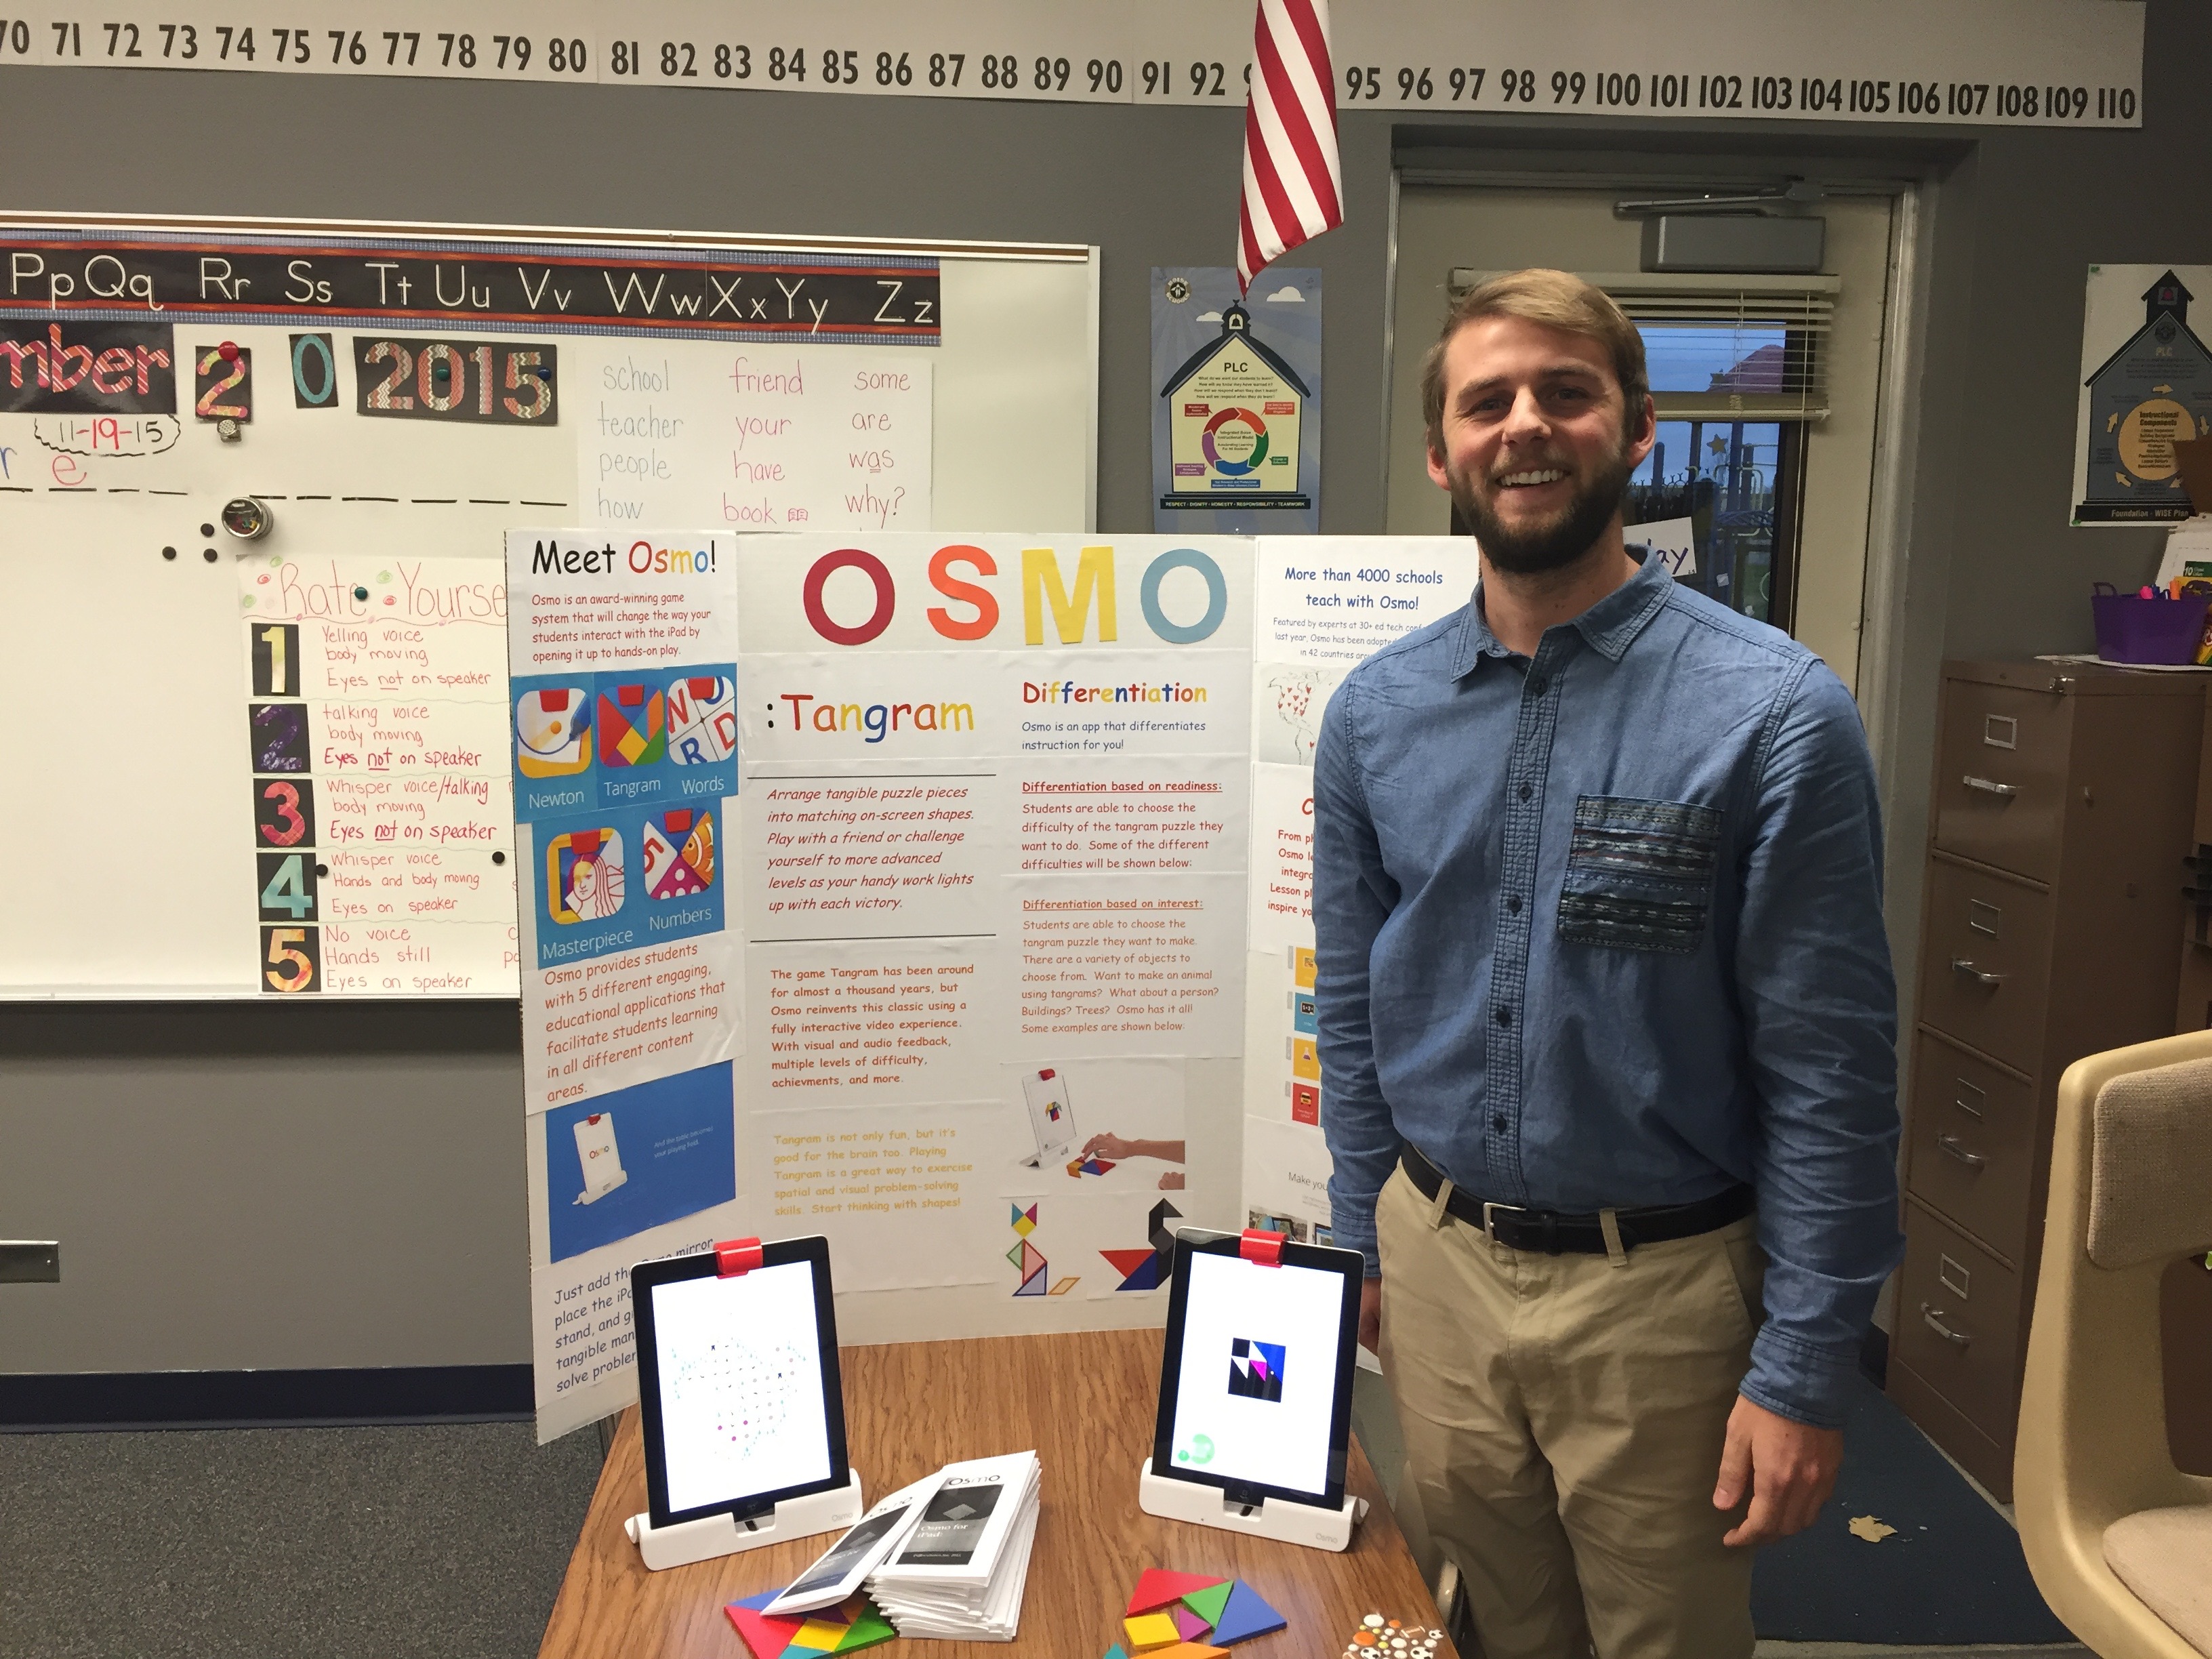 Zak Porter presented on Osmo as a differentiation strategy.